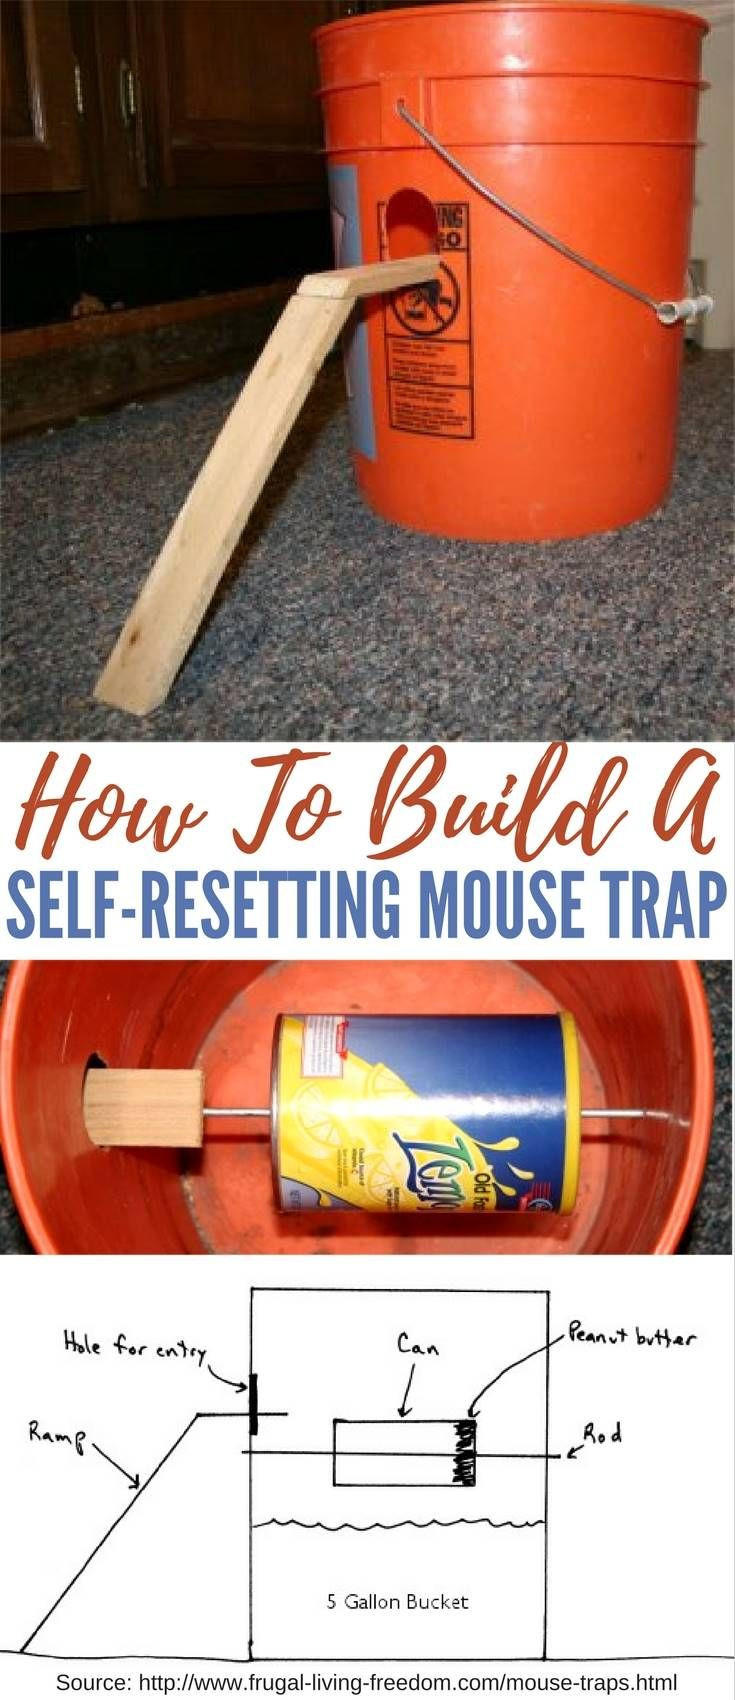 22 Cute Hardwood Floor Refinishing topeka Ks 2024 free download hardwood floor refinishing topeka ks of 461 best diy images on pinterest electric electrical outlets and inside how to build a self resetting mouse trap